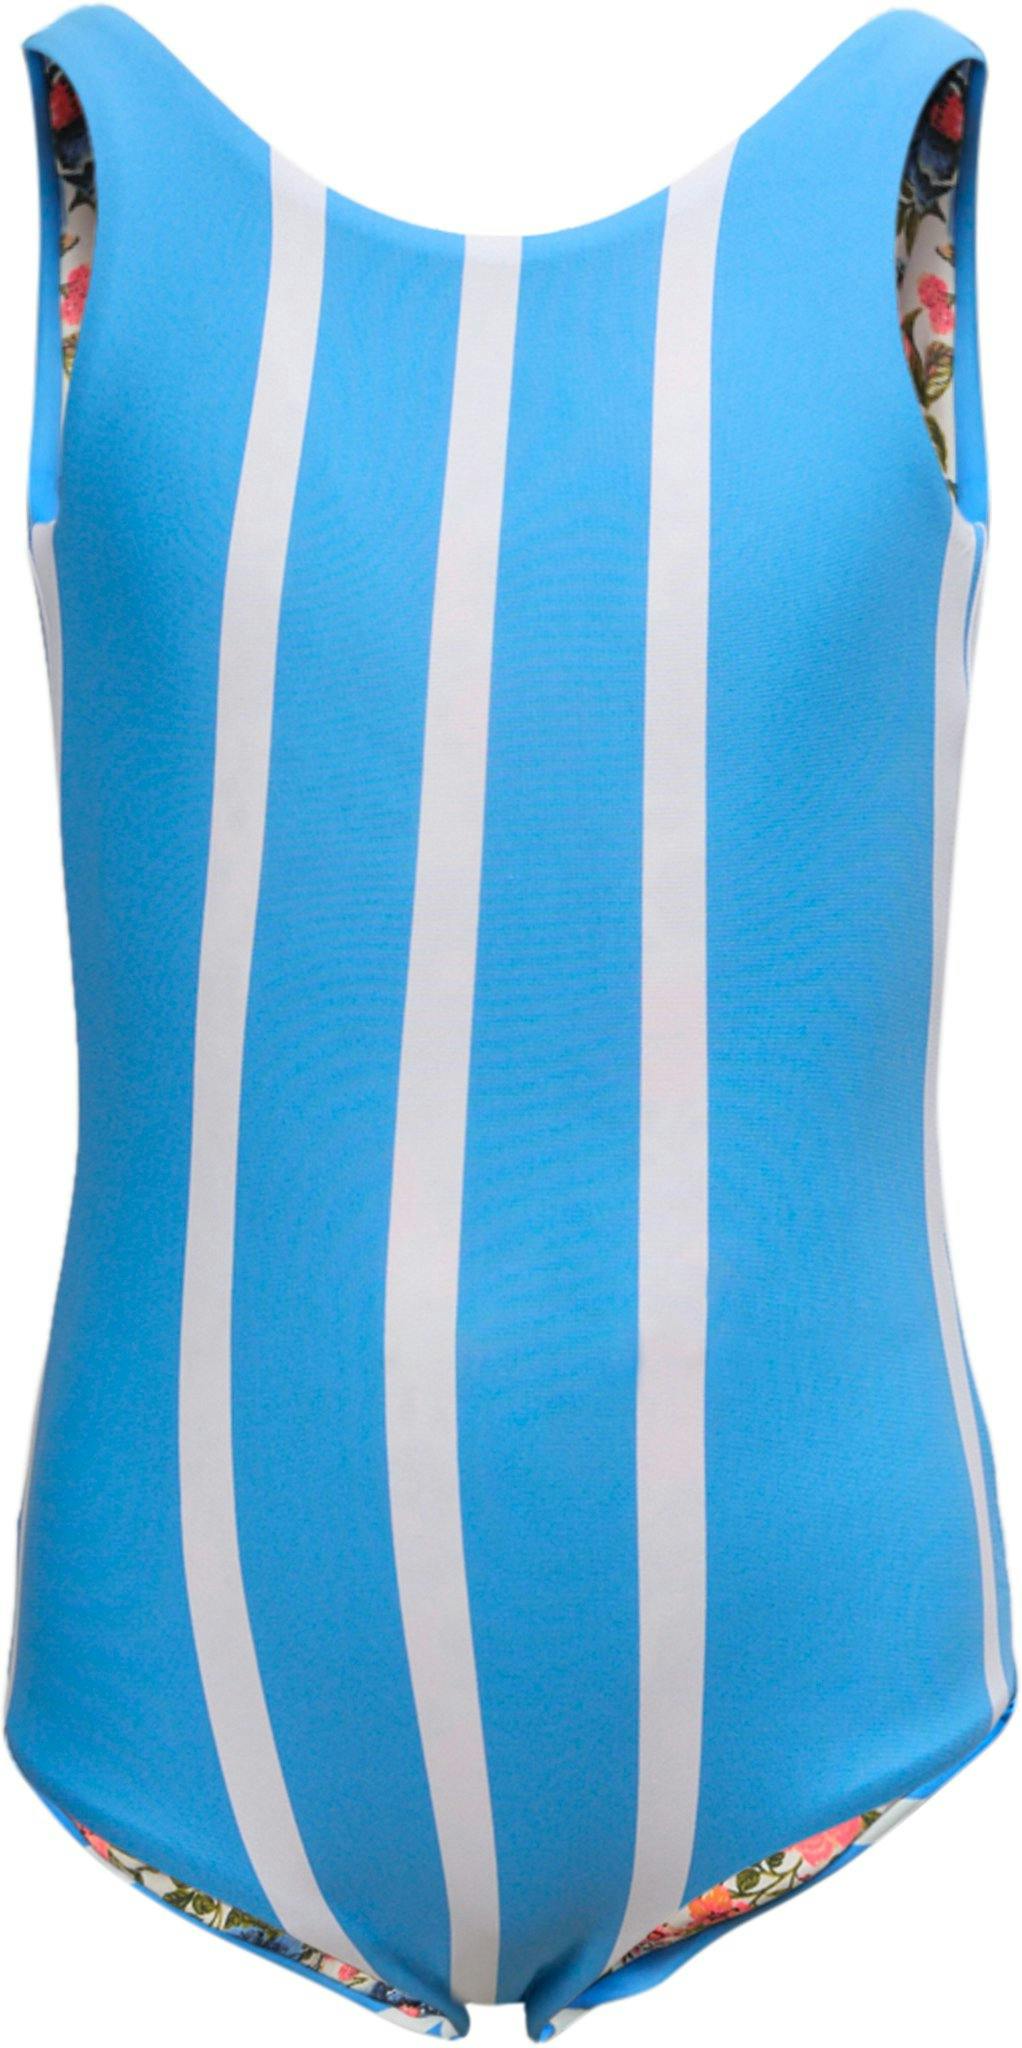 Product image for Sail Stripe Infinity One-piece swimsuit  - Girls 